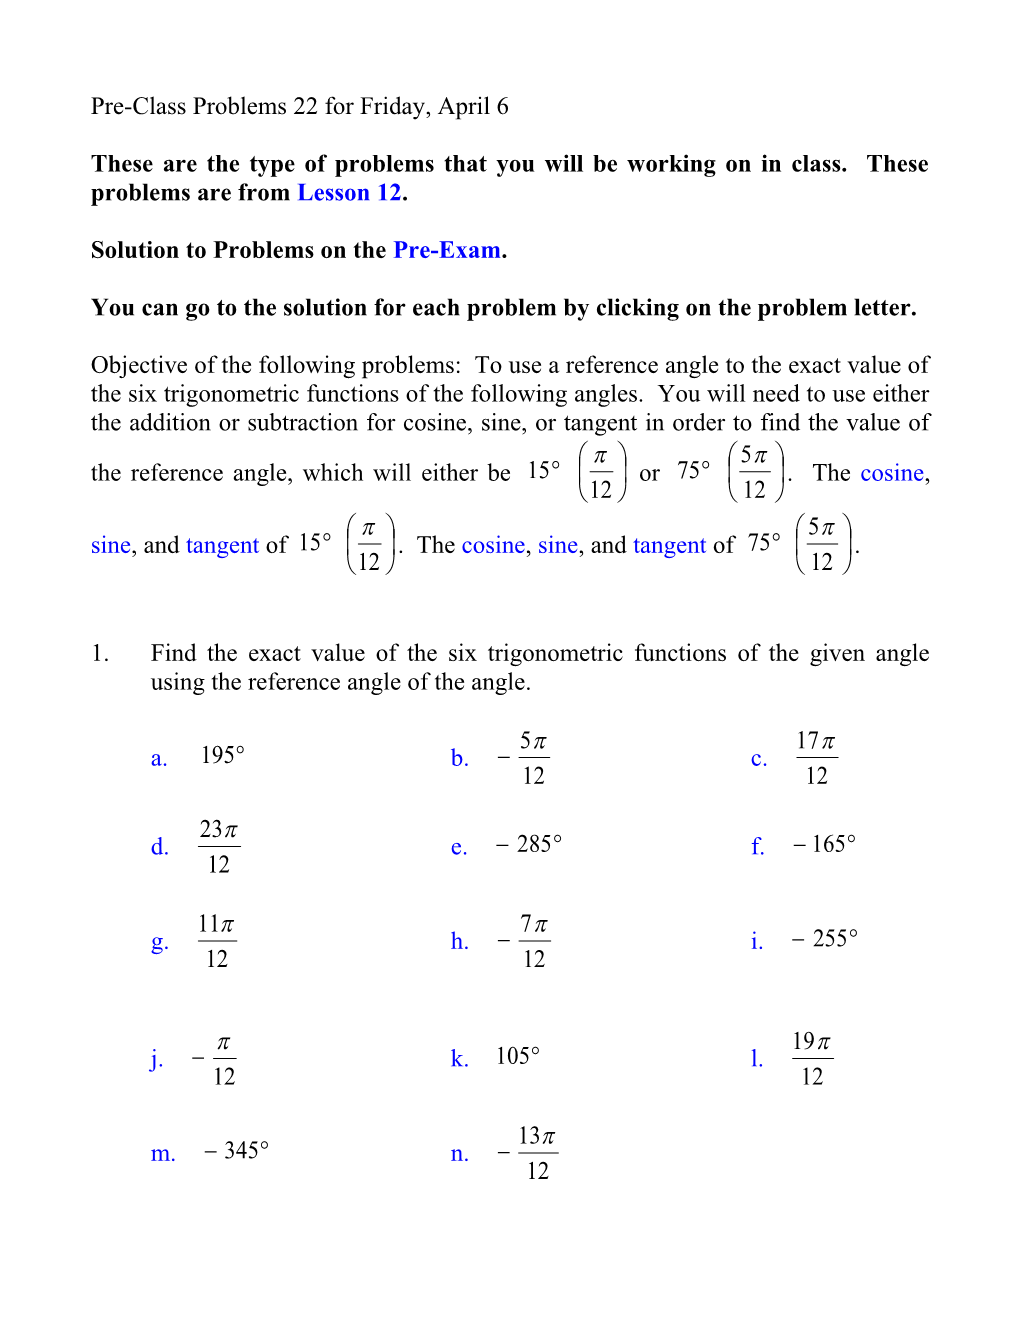 You Can Go to the Solution for Each Problem by Clicking on the Problem Letter s1